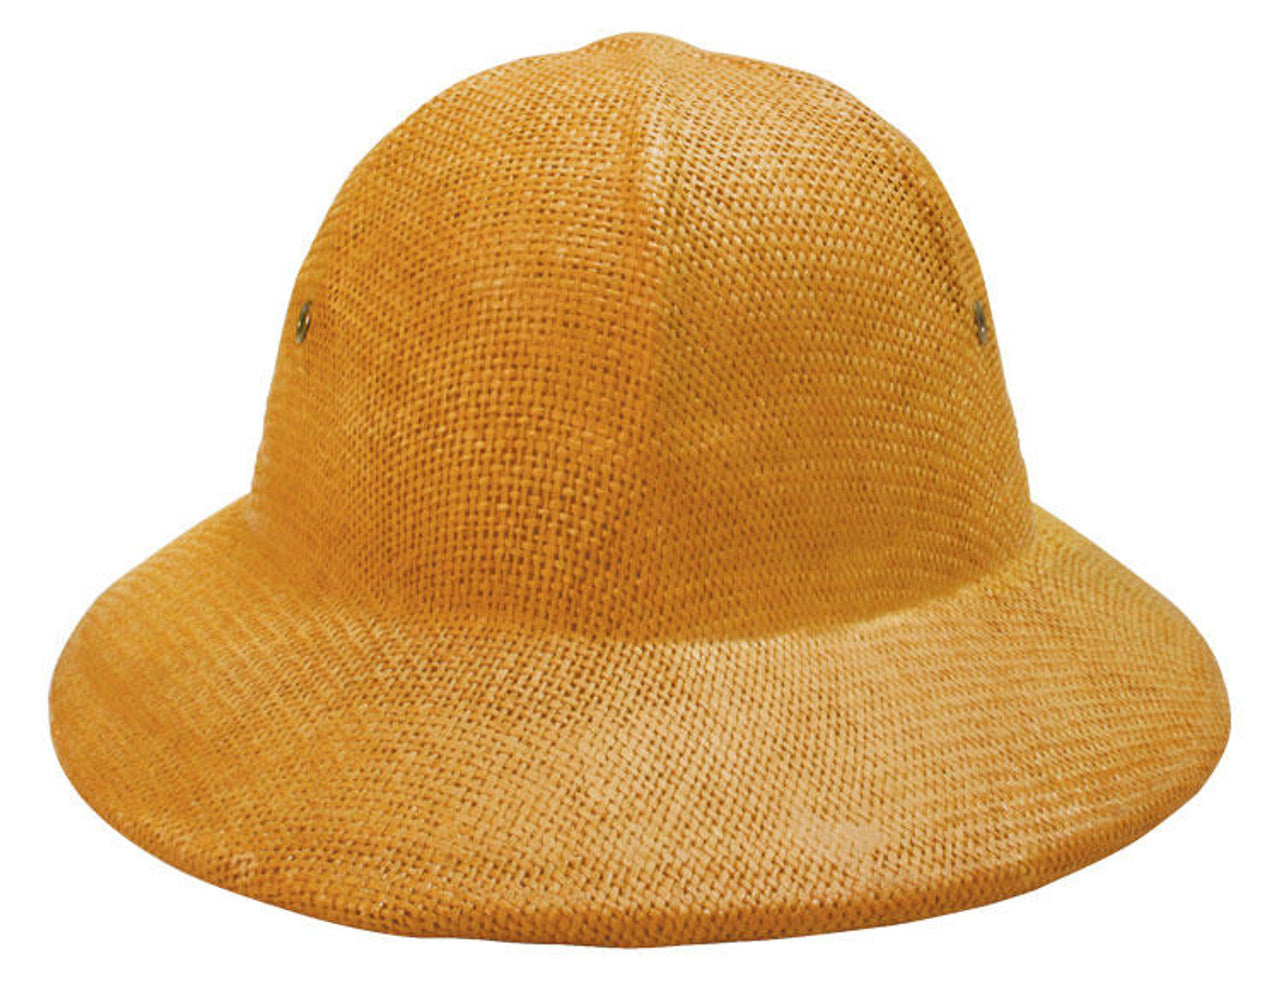 Tan helmet with ventilation for standard use.